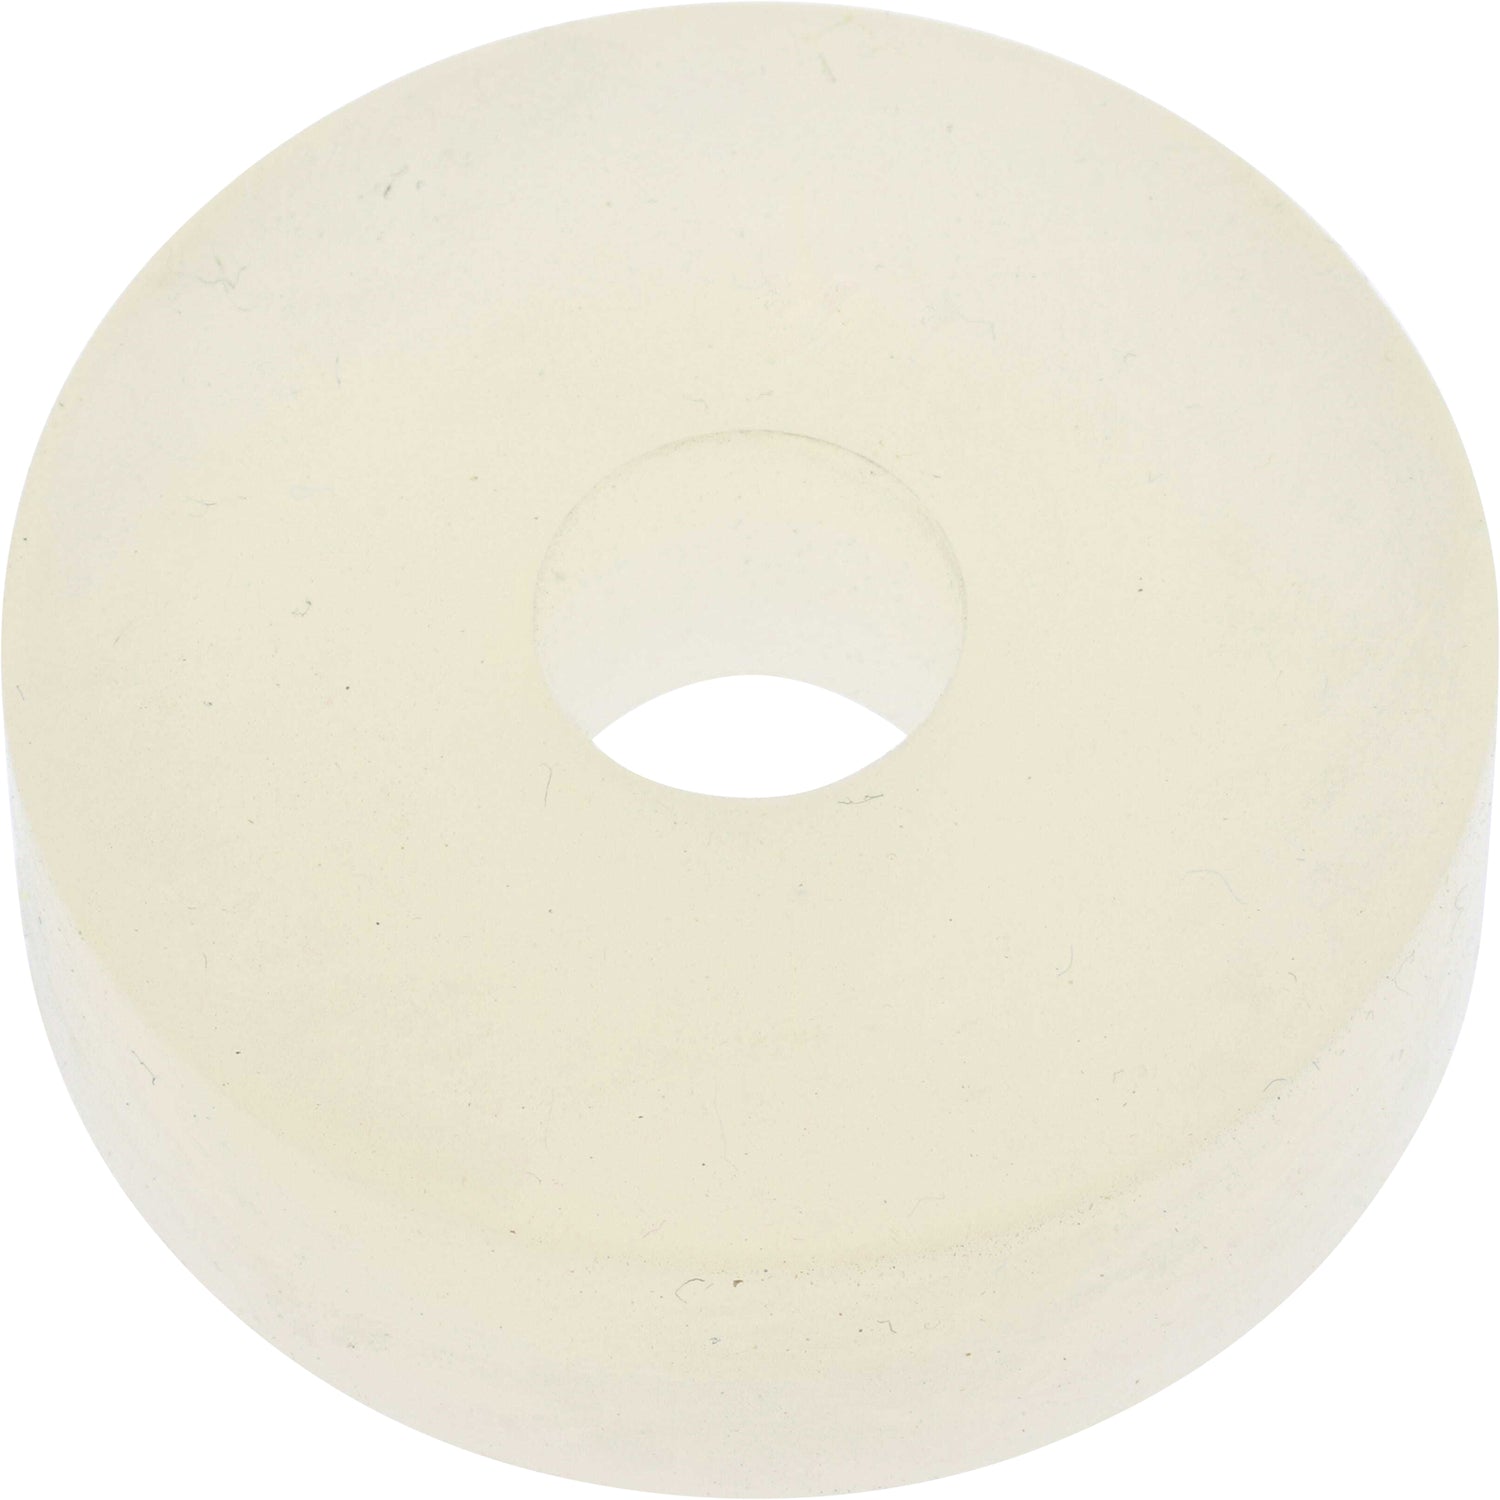 Off white, disk shaped rubber seal with hole in center on white background. P0-00153